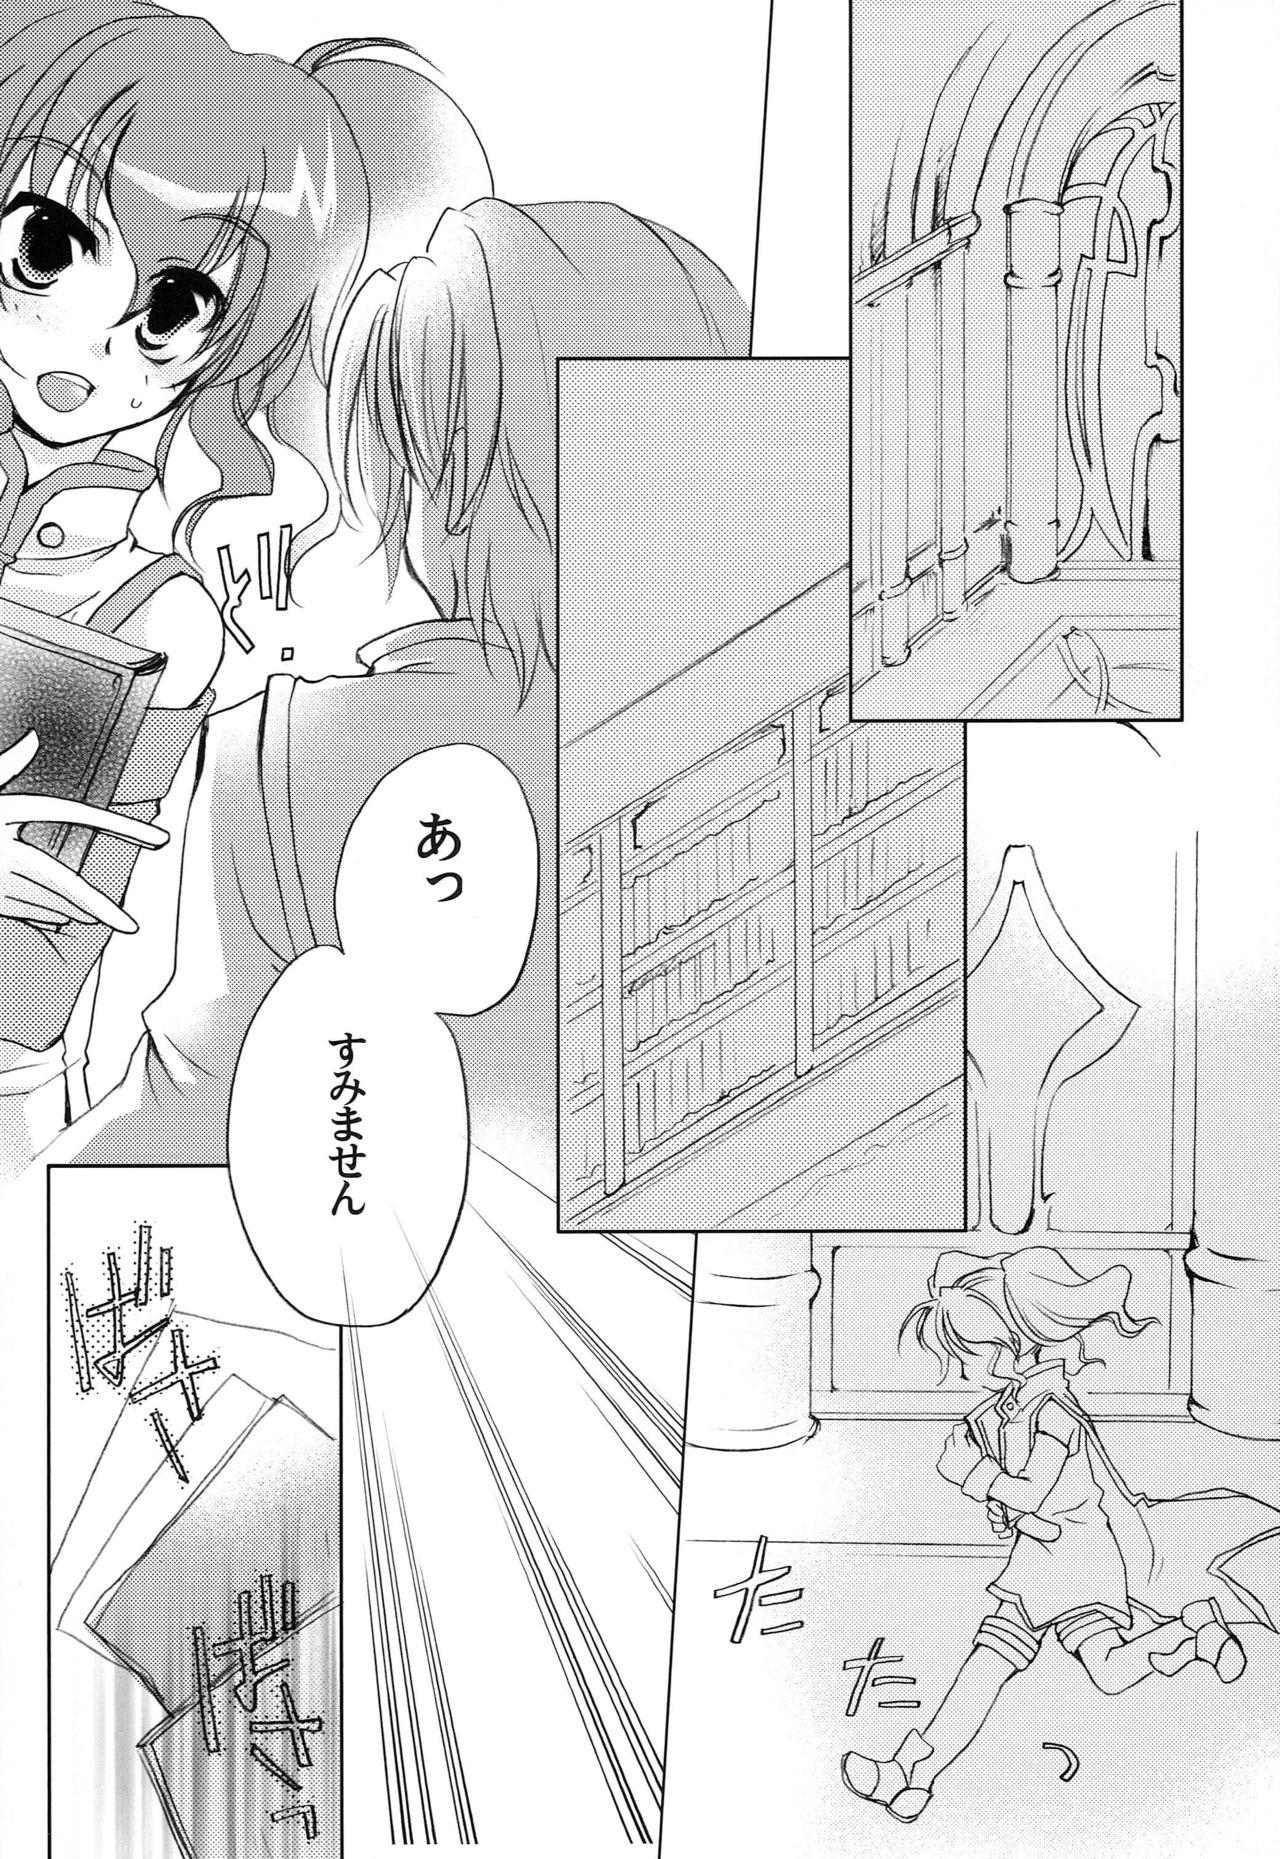 Pale Carnation, Lily, Lily, Rose - Tales of the abyss Blowjob - Page 3